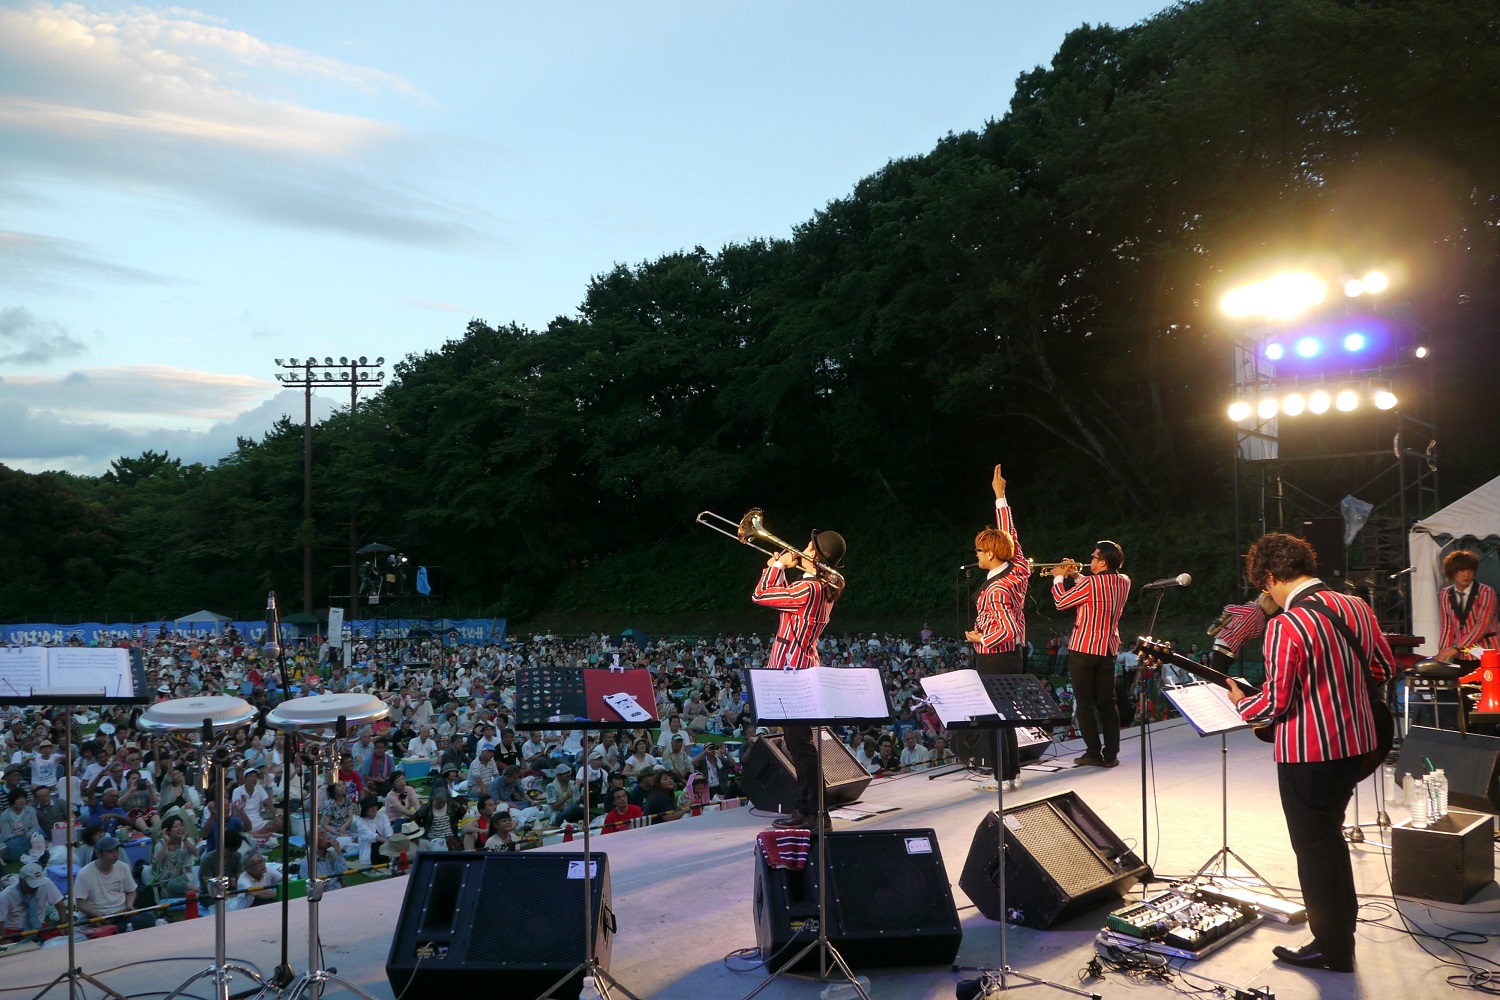 4. Open-air music festivals enjoyed in Japan's birthplace of jazz